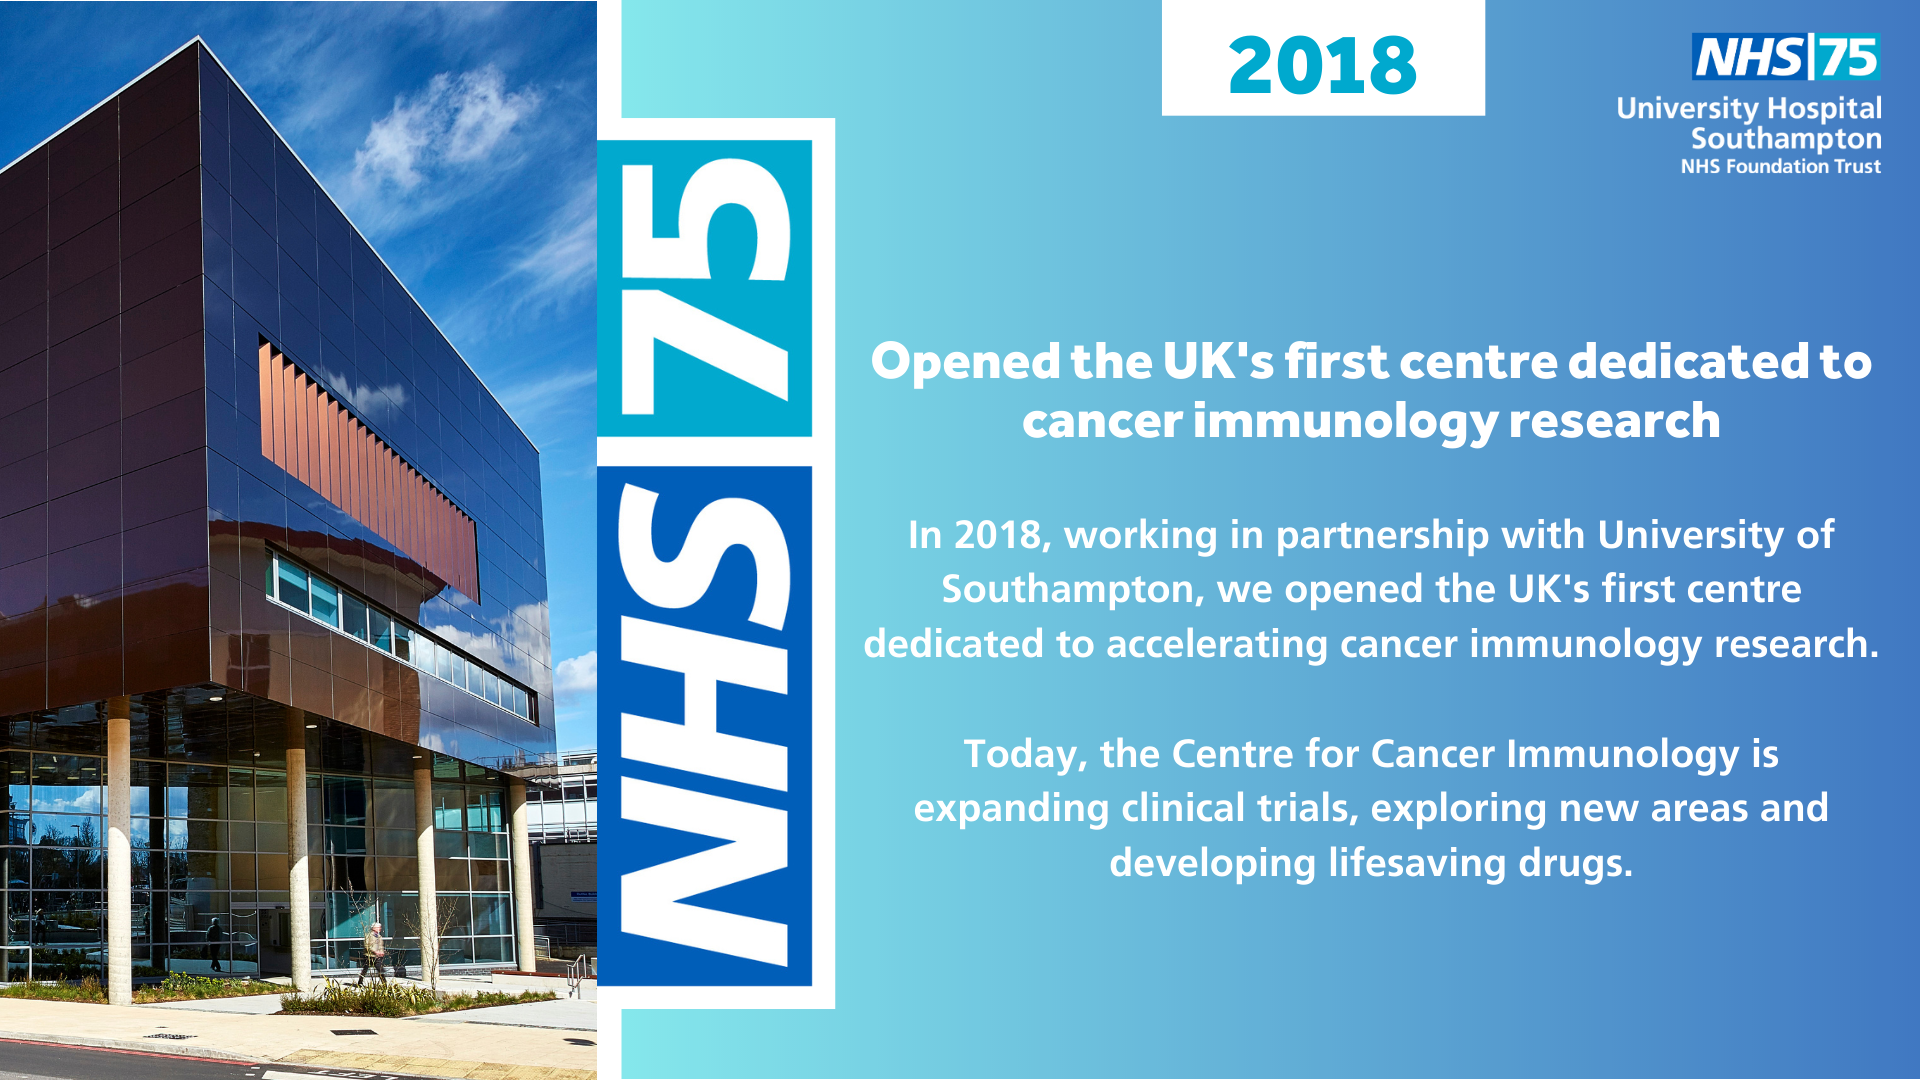 Opened the UK's first centre dedicated to cancer immunology research